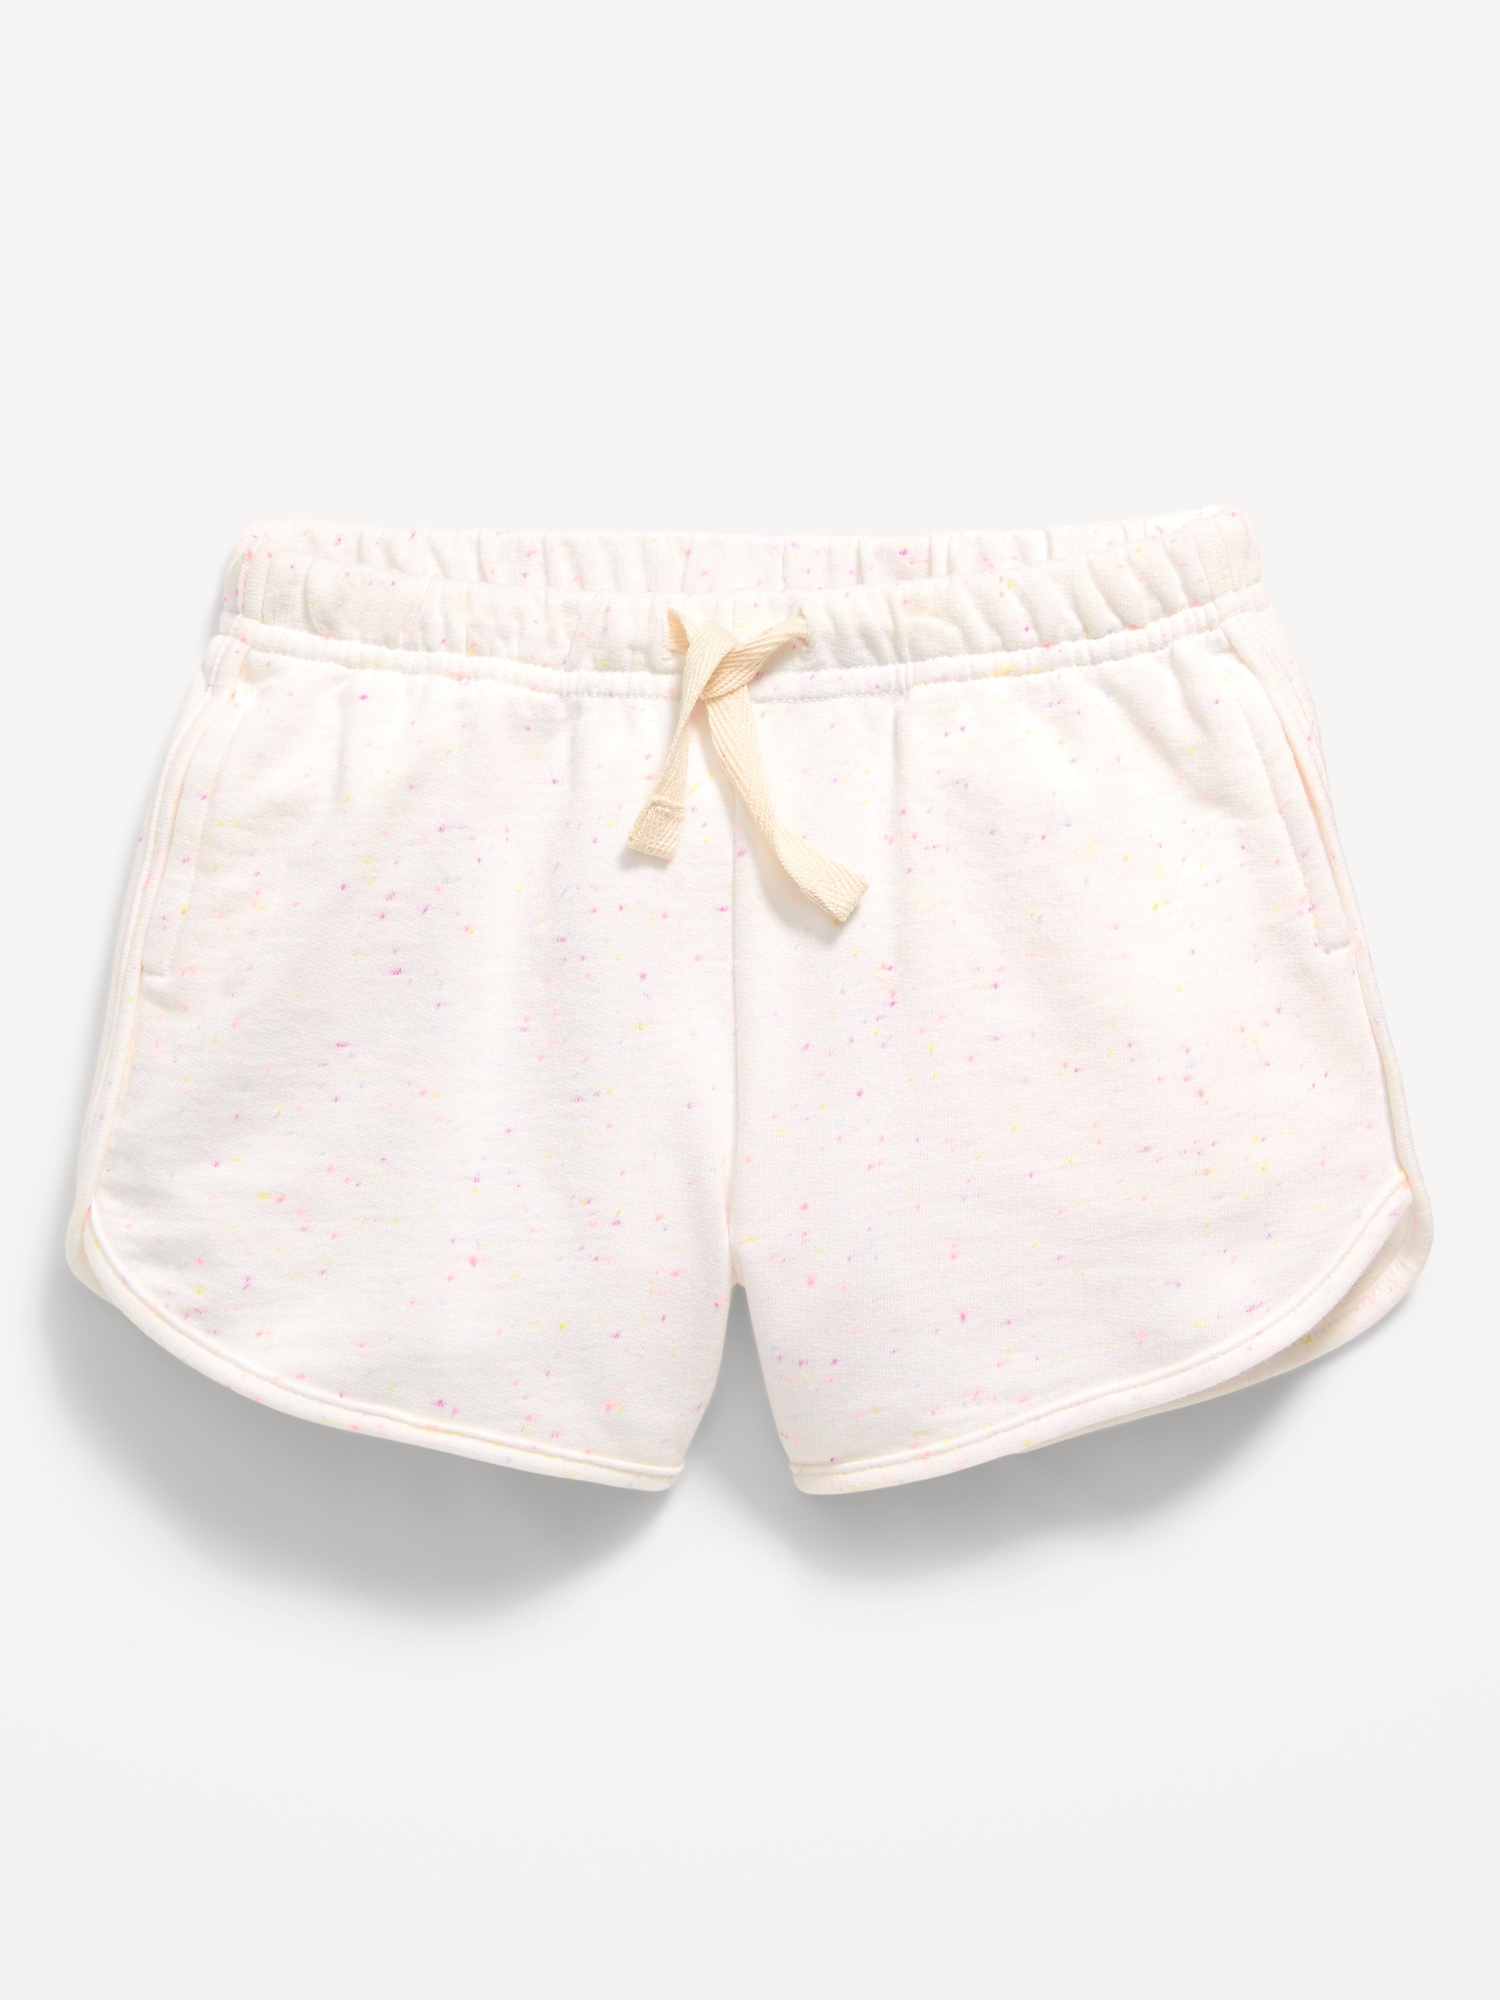 French Terry Dolphin-Hem Shorts for Toddler Girls Hot Deal